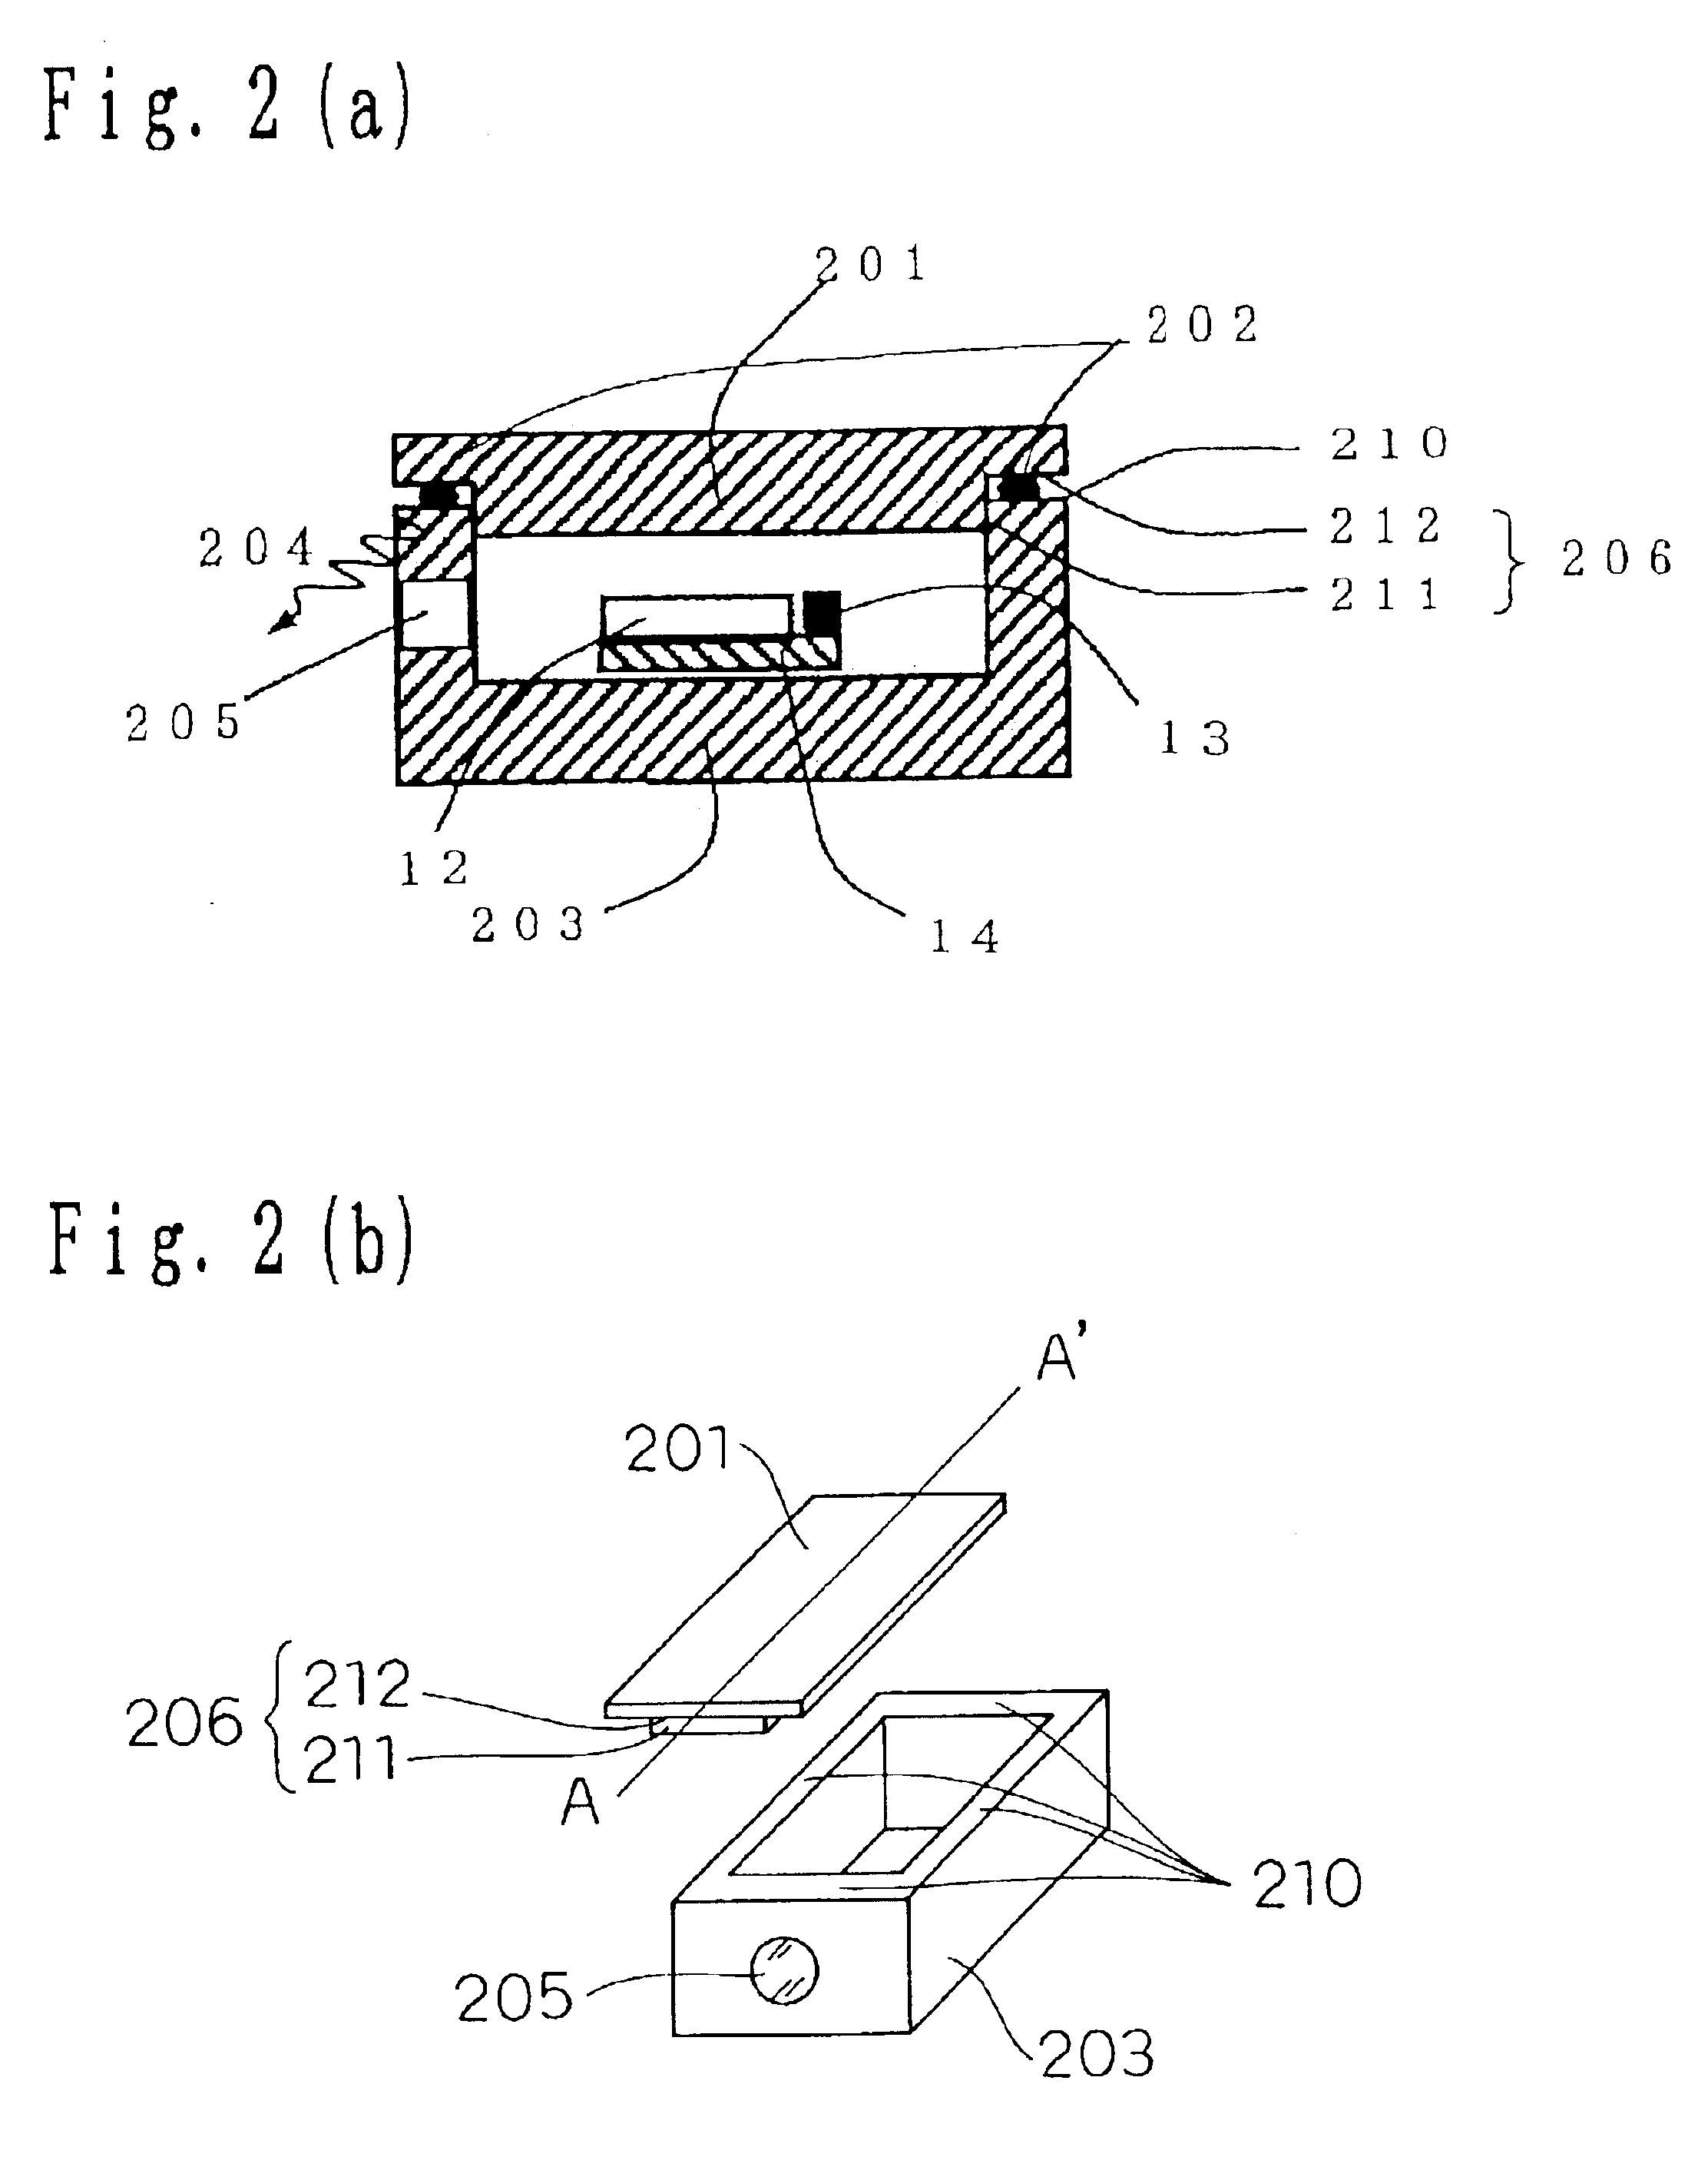 Short-wavelength laser module and method of producing the same